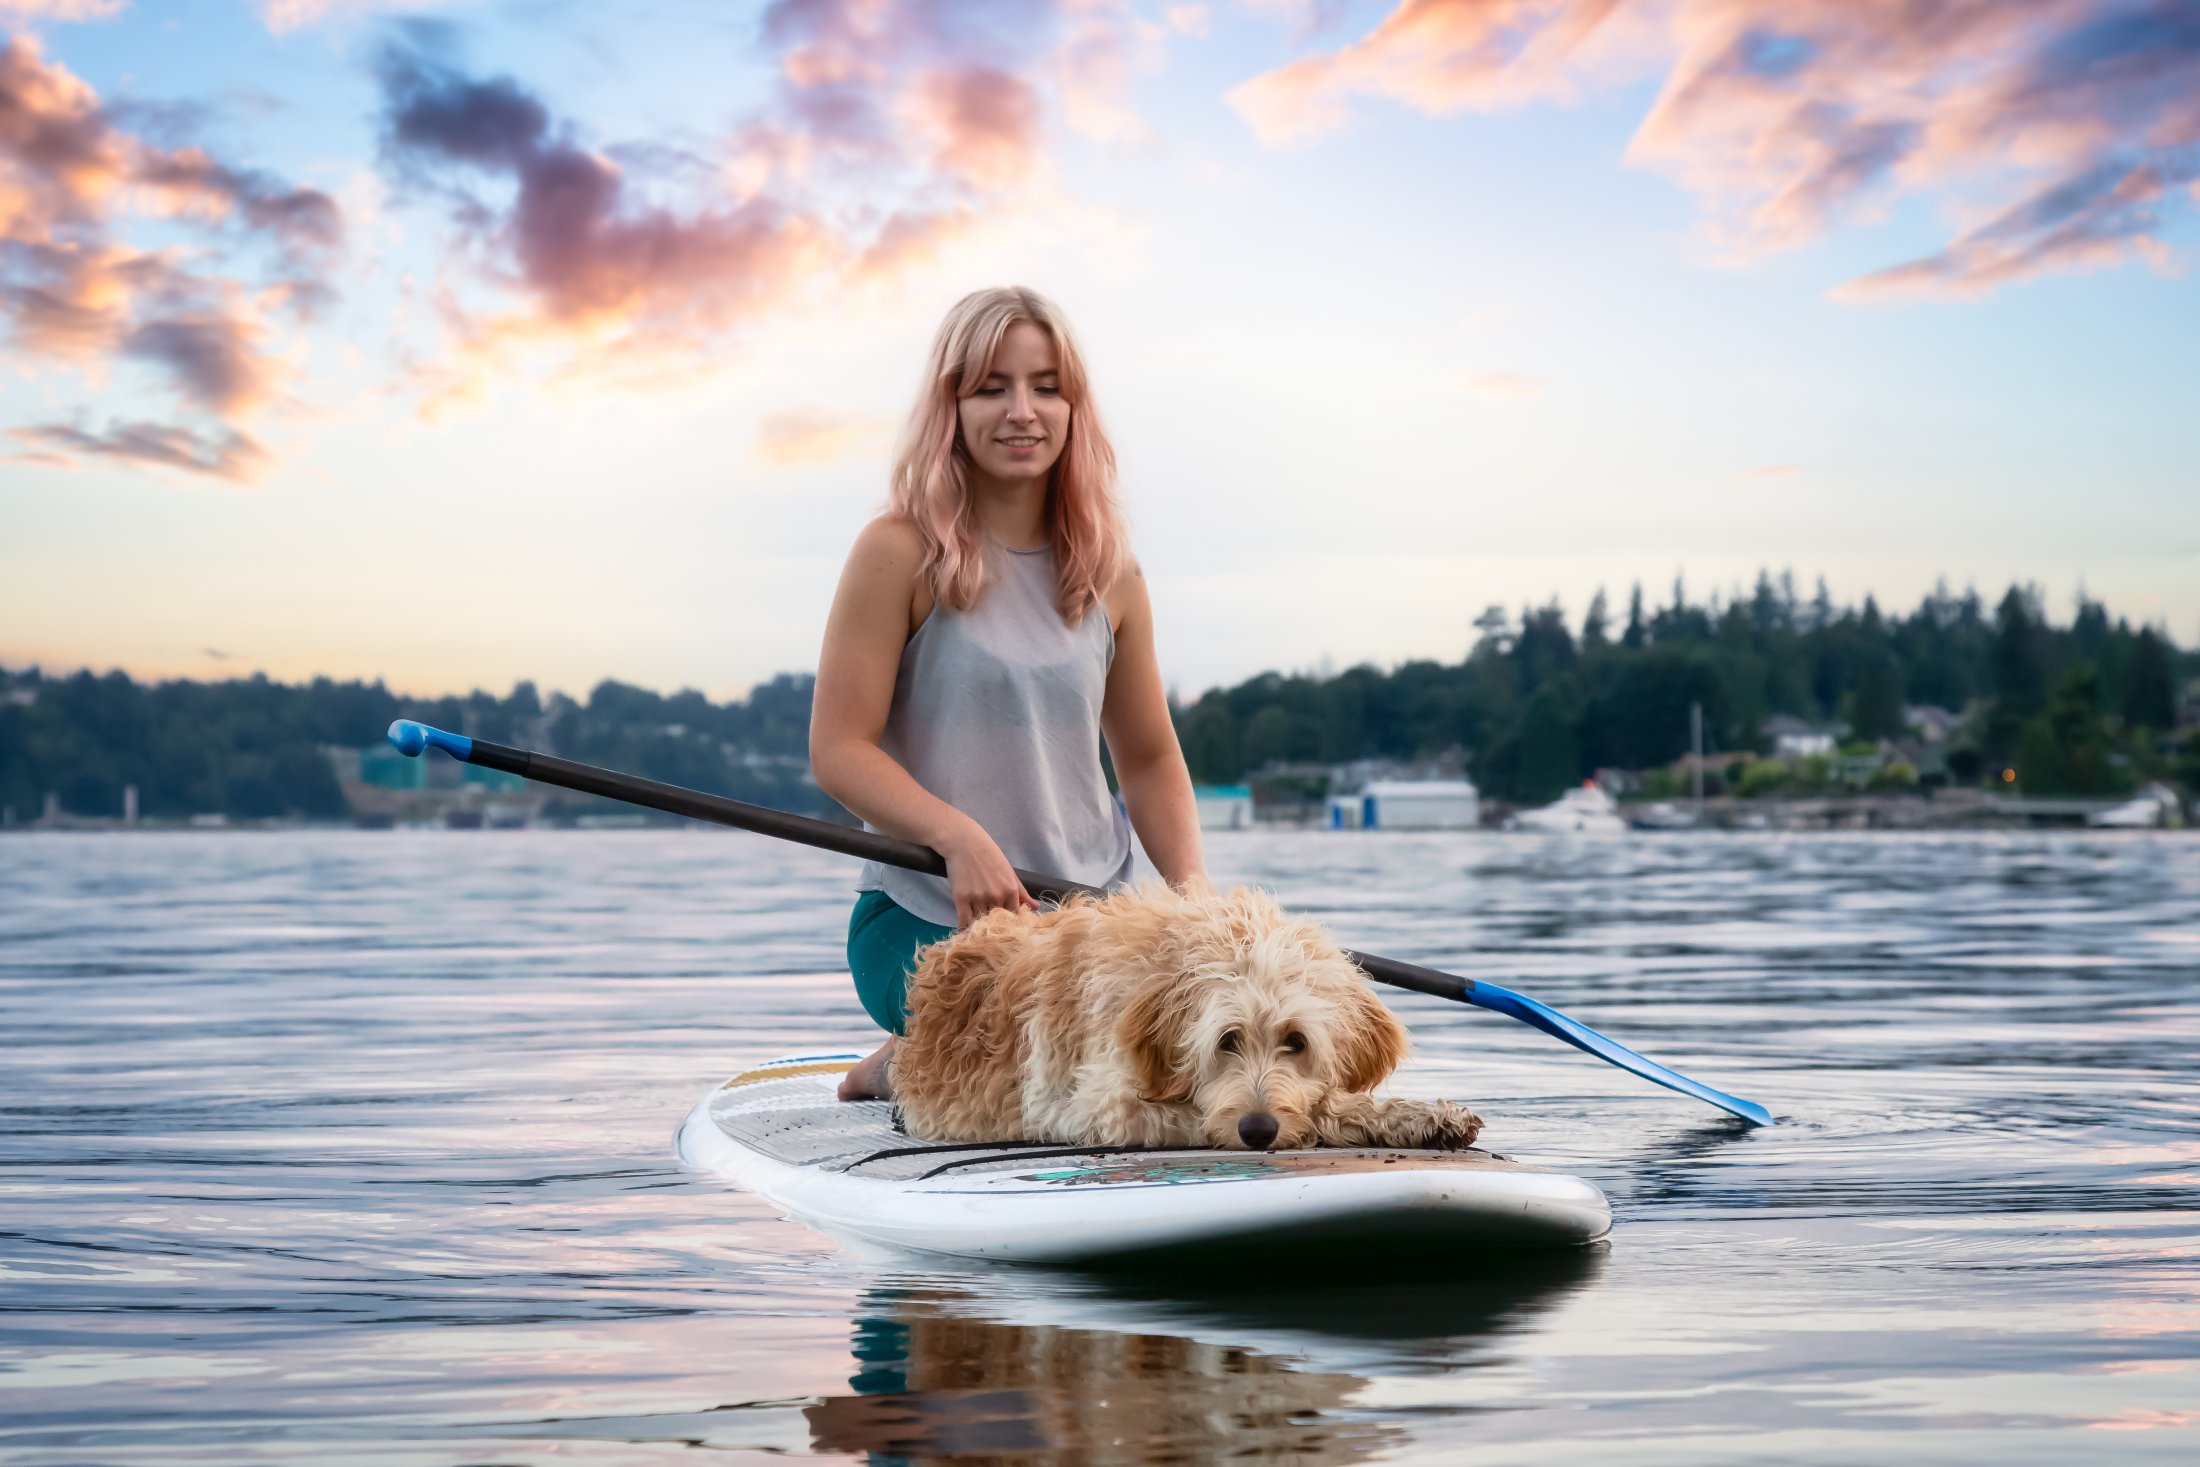 Girl,With,A,Dog,On,A,Paddle,Board,During,A